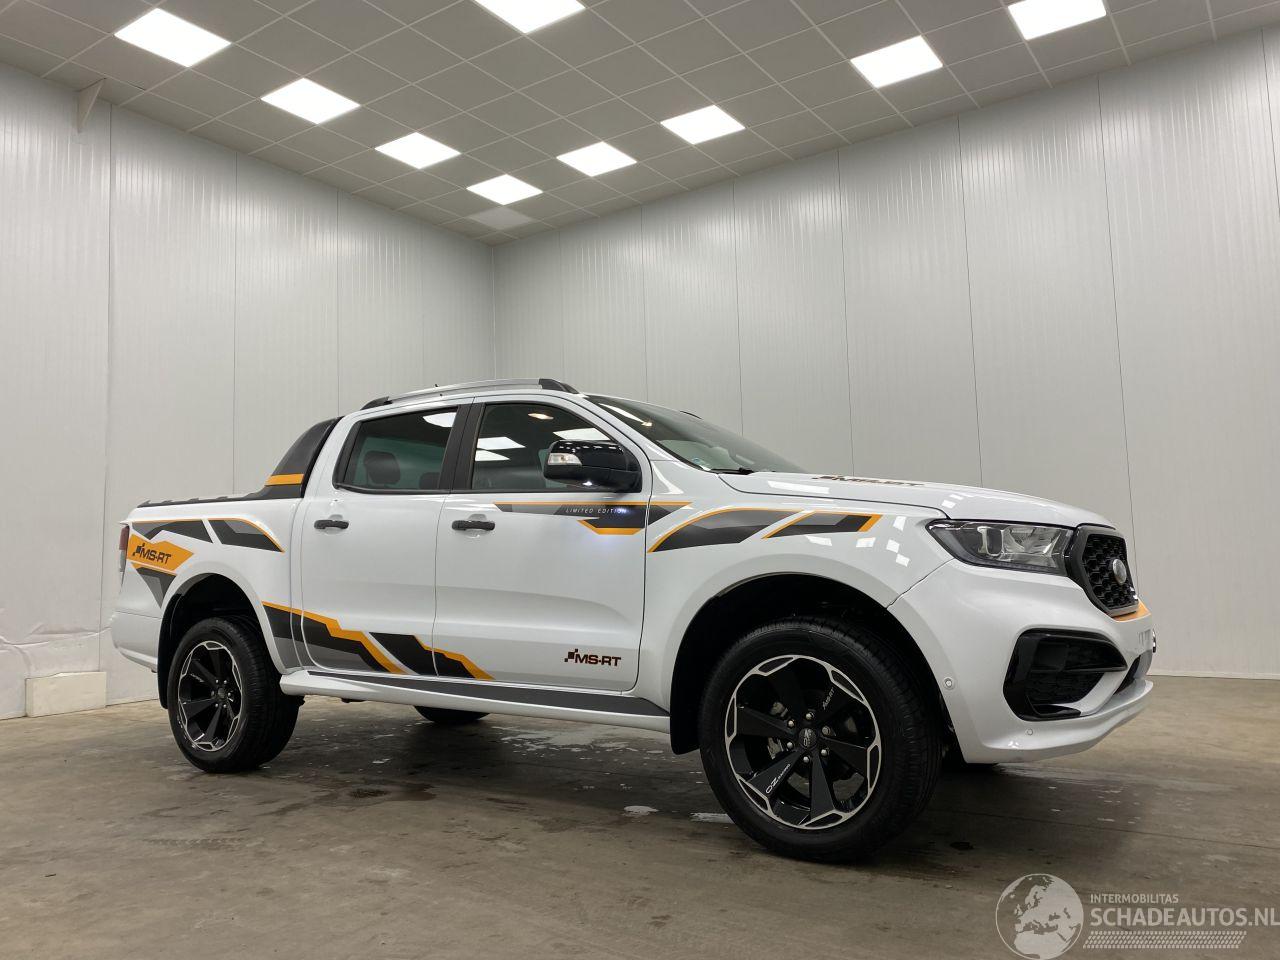 Ford Ranger 2.0 Autom. MS-RT Limited Edition Wildtrak